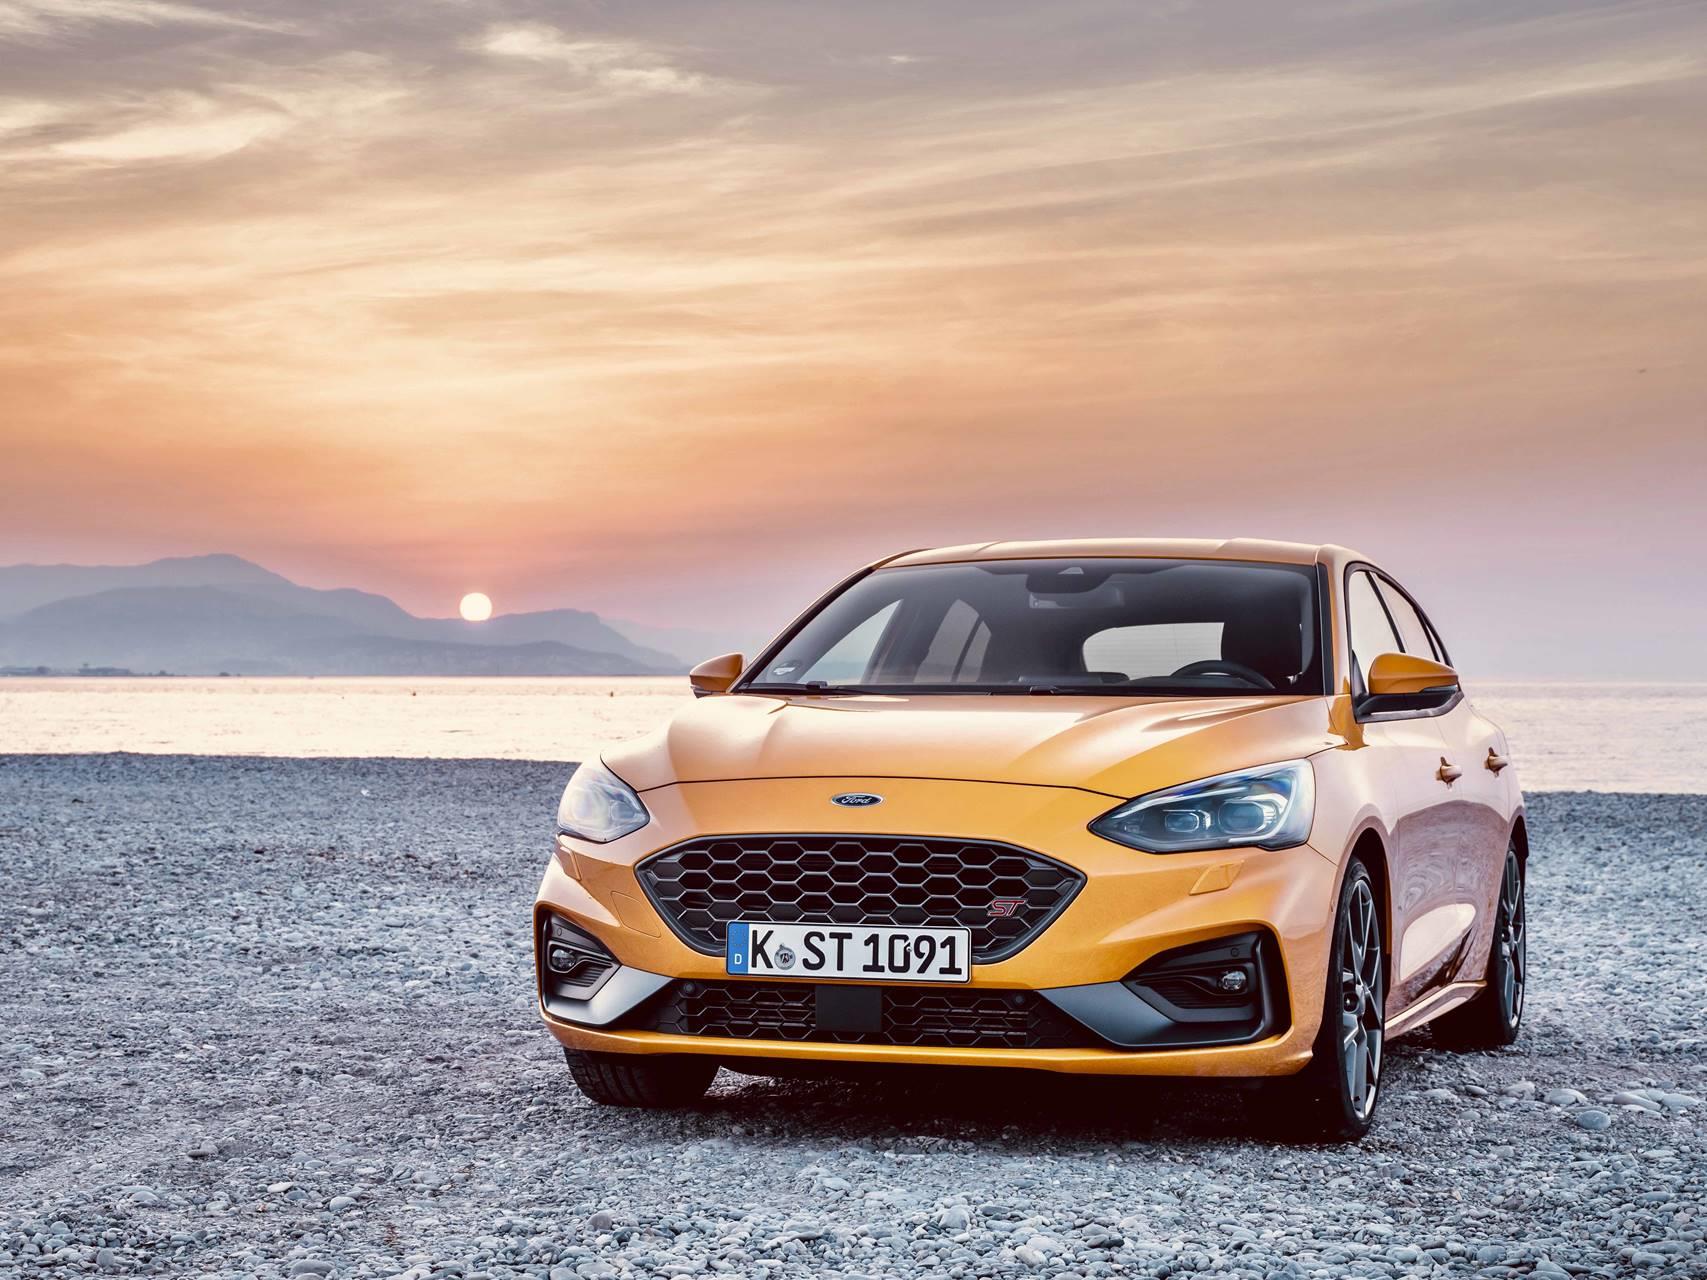 2020 Ford Focus ST